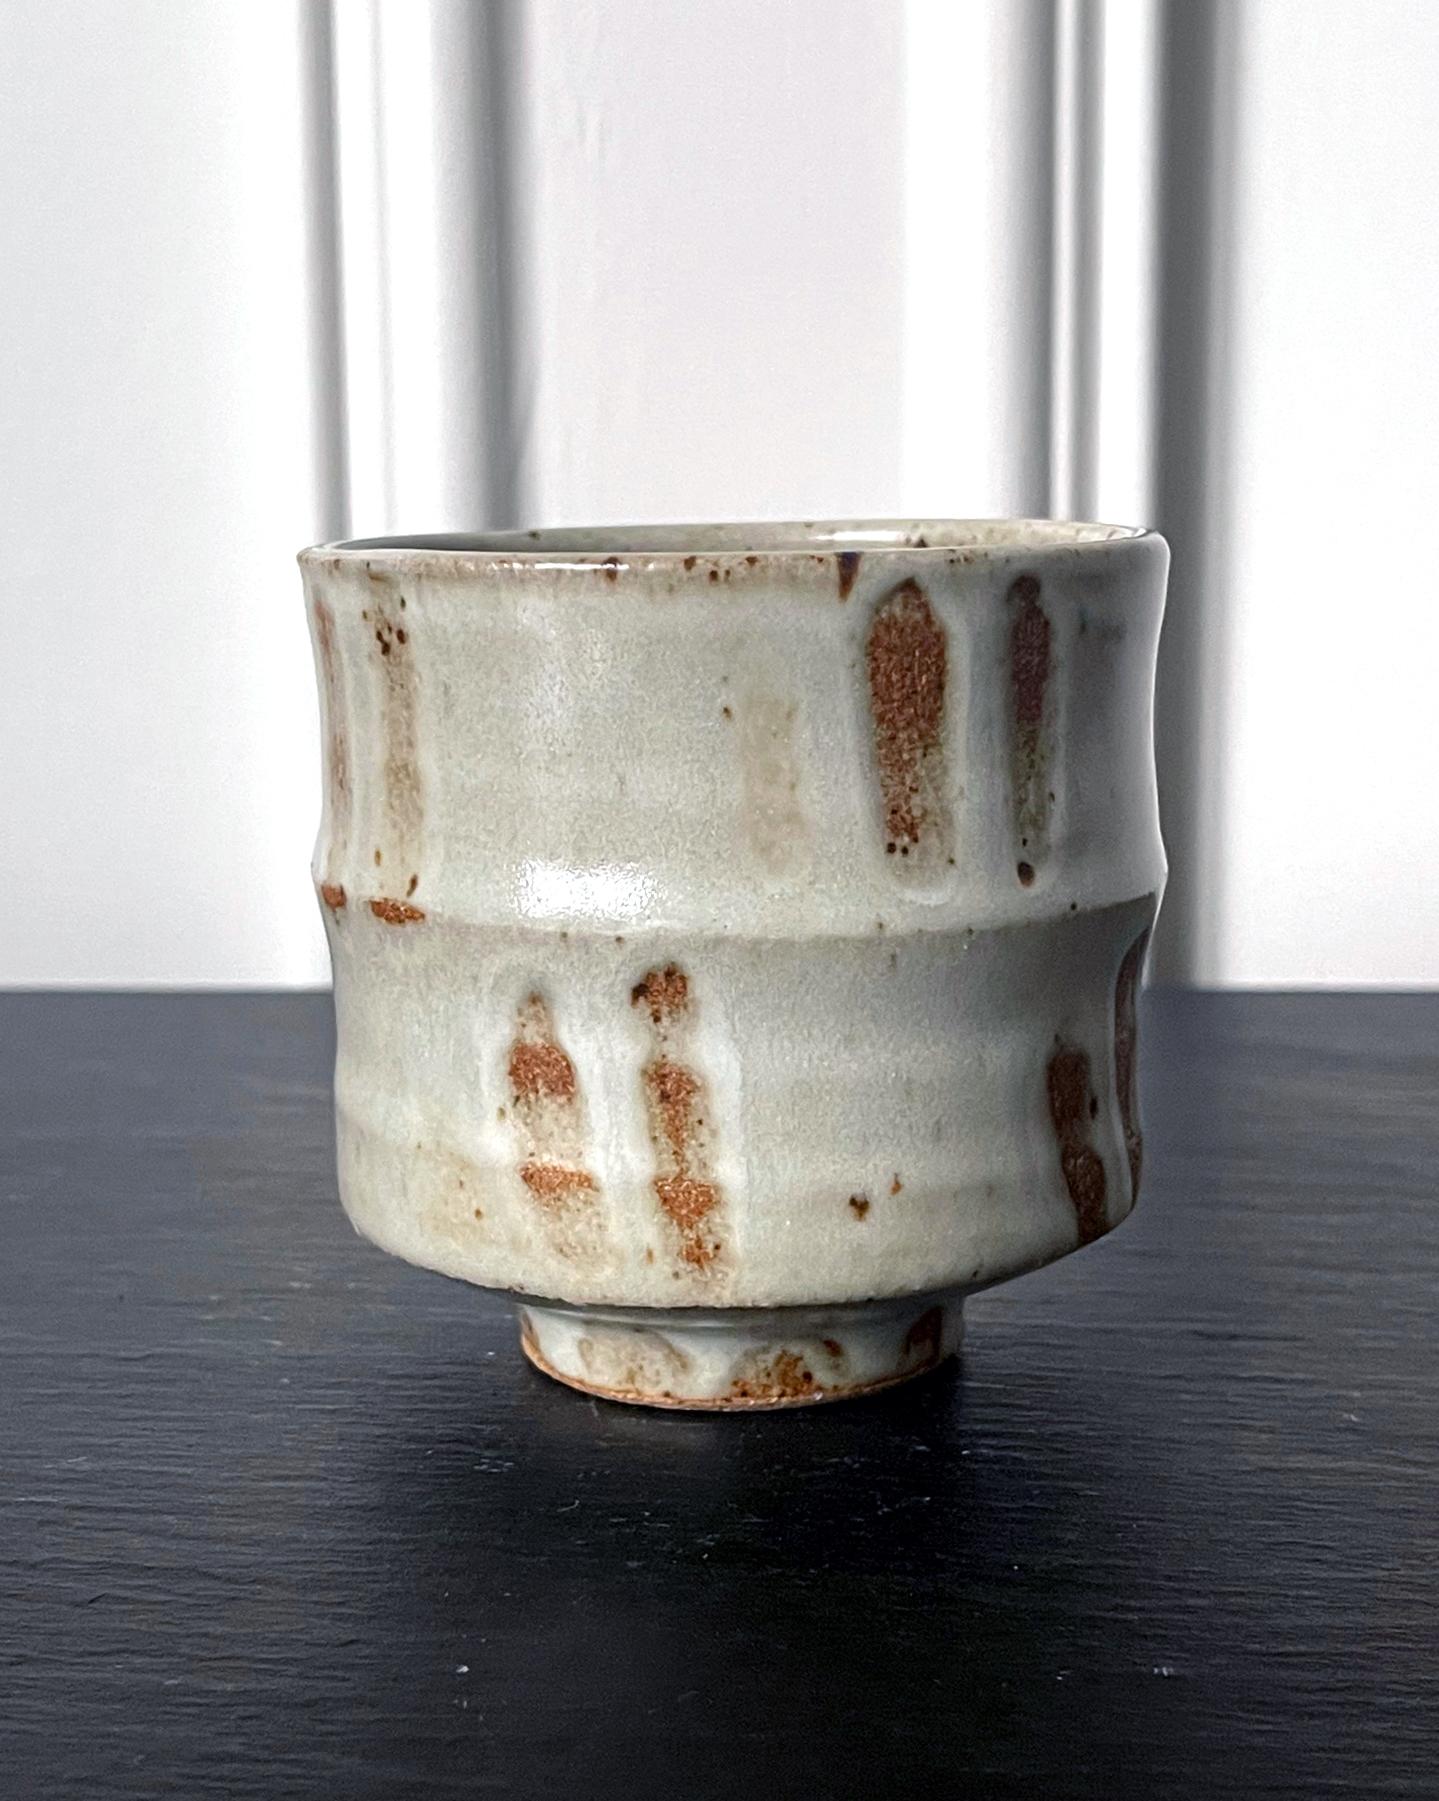 A stoneware tea bowl by American ceramist Warren Mackenzie (1924-2018). Potted in a column shape with a prominent encircling ridged node in the midsection, the upright bowl evokes the silouette of a bamboo trunk. The surface is covered in a milky